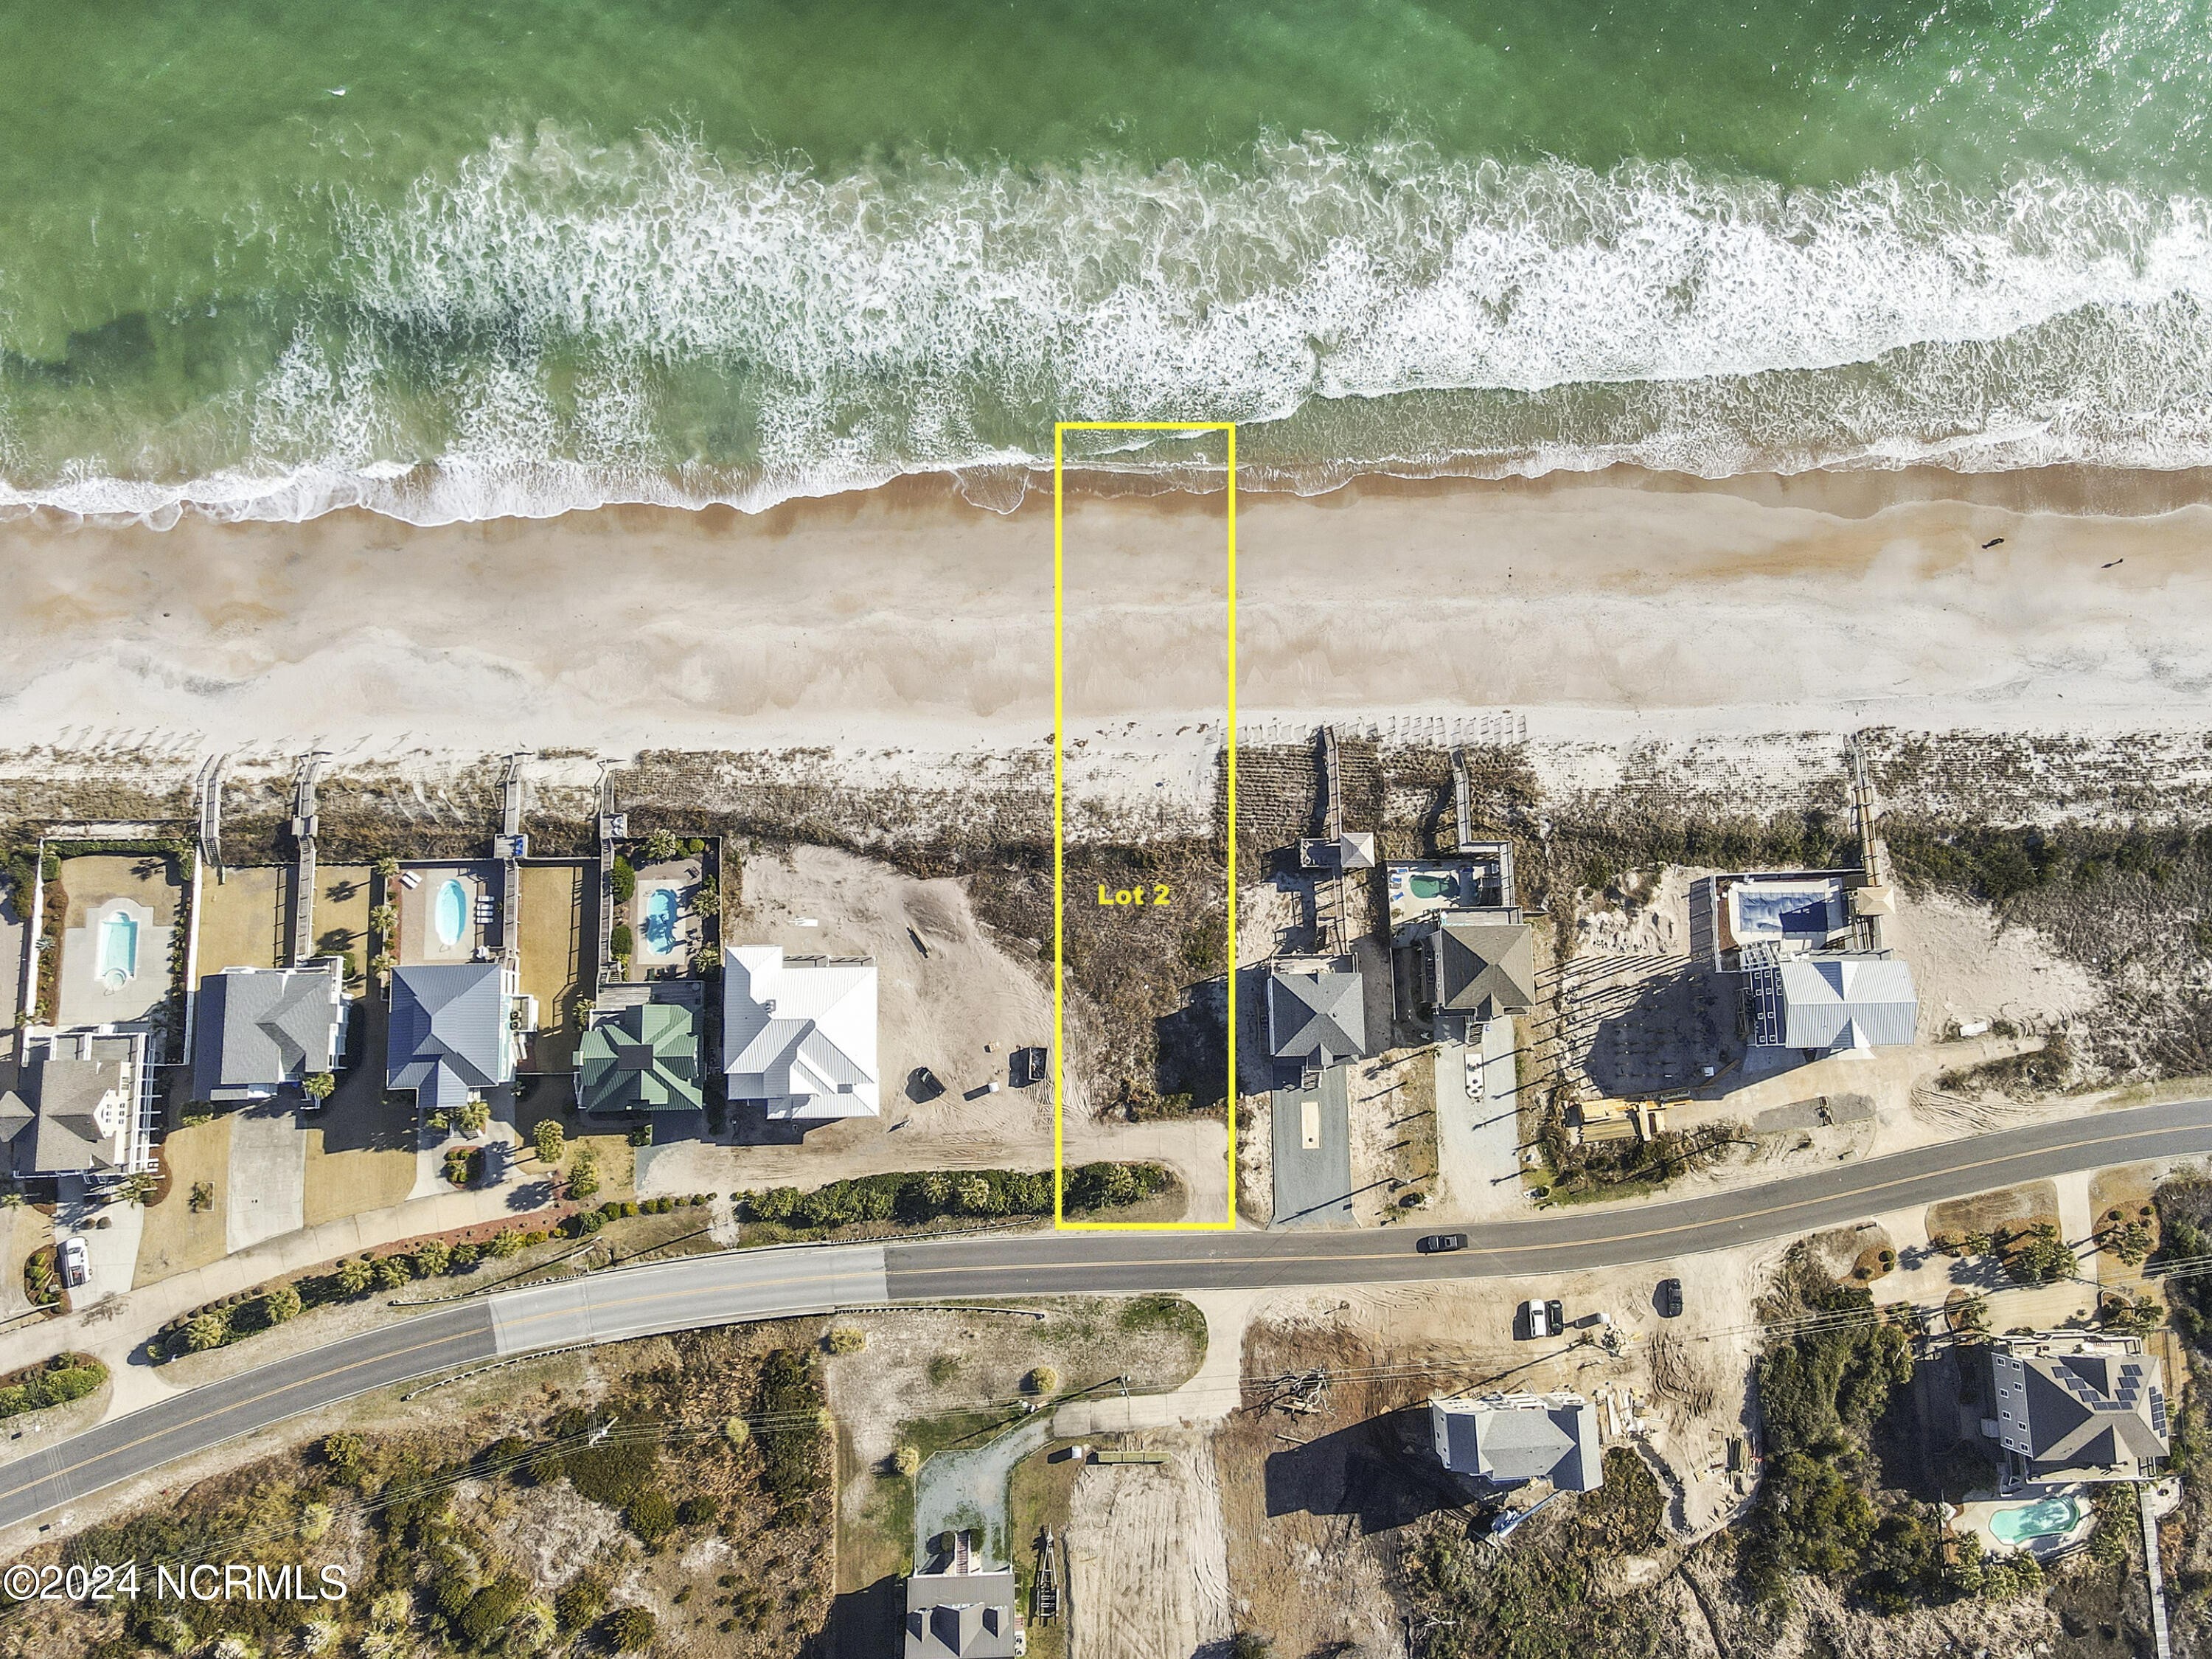 1. Lot 2 New River Inlet Road